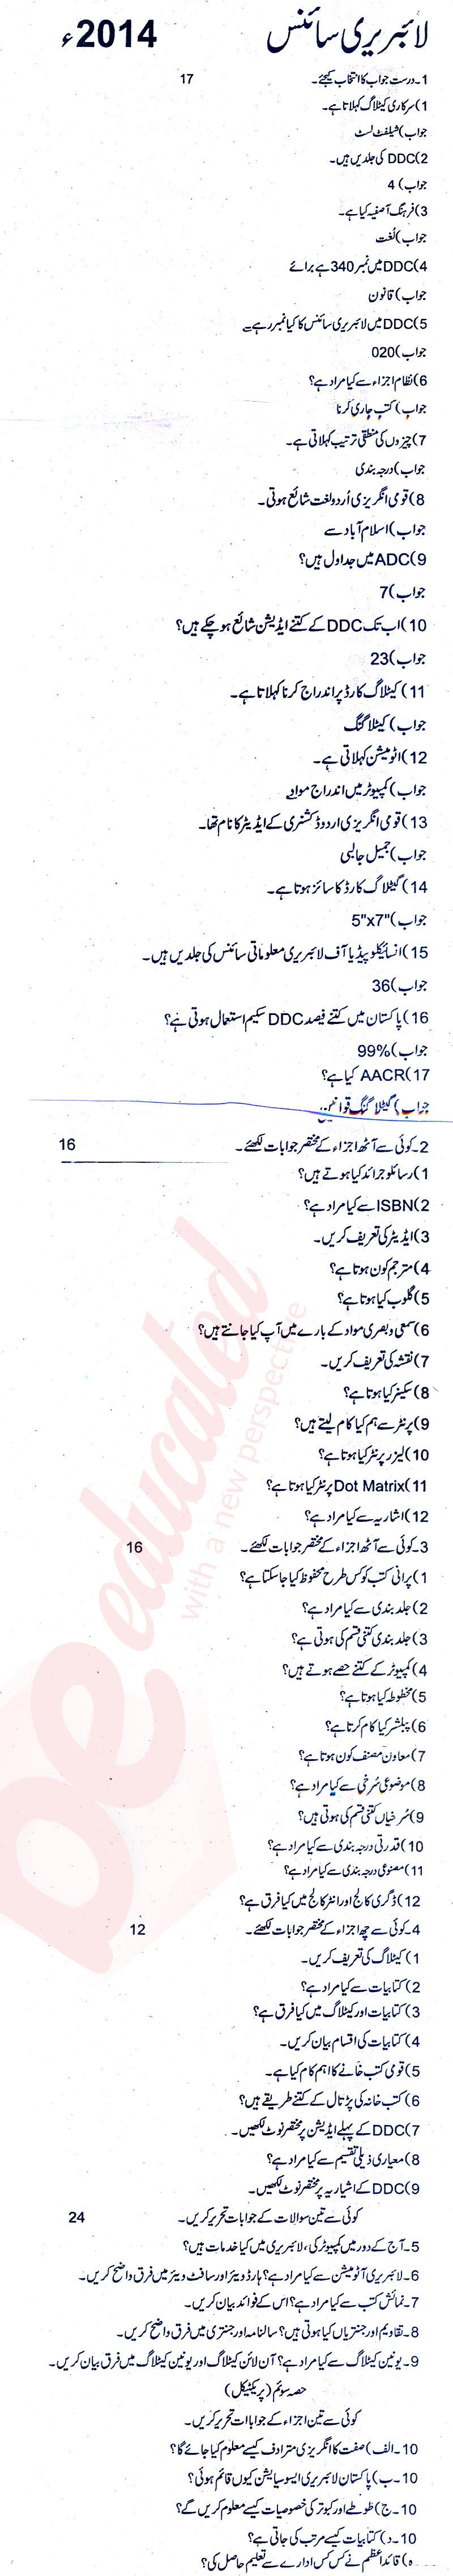 Library Science FA Part 2 Past Paper Group 1 BISE Rawalpindi 2014